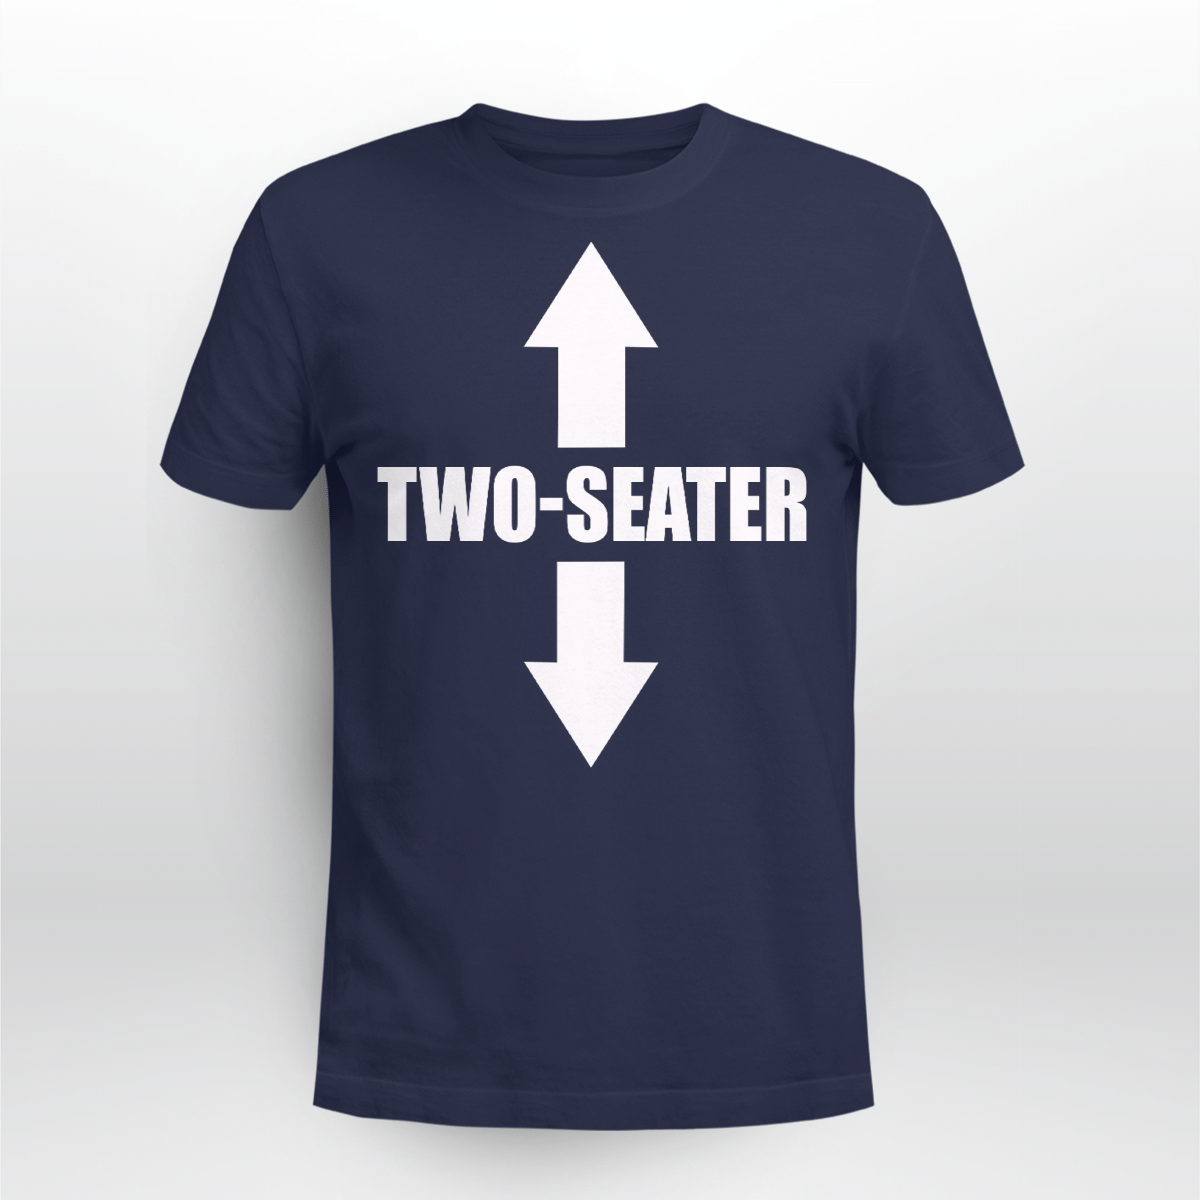 Two Seater Funny Shirt Style: Unisex T-shirt, Color: Navy